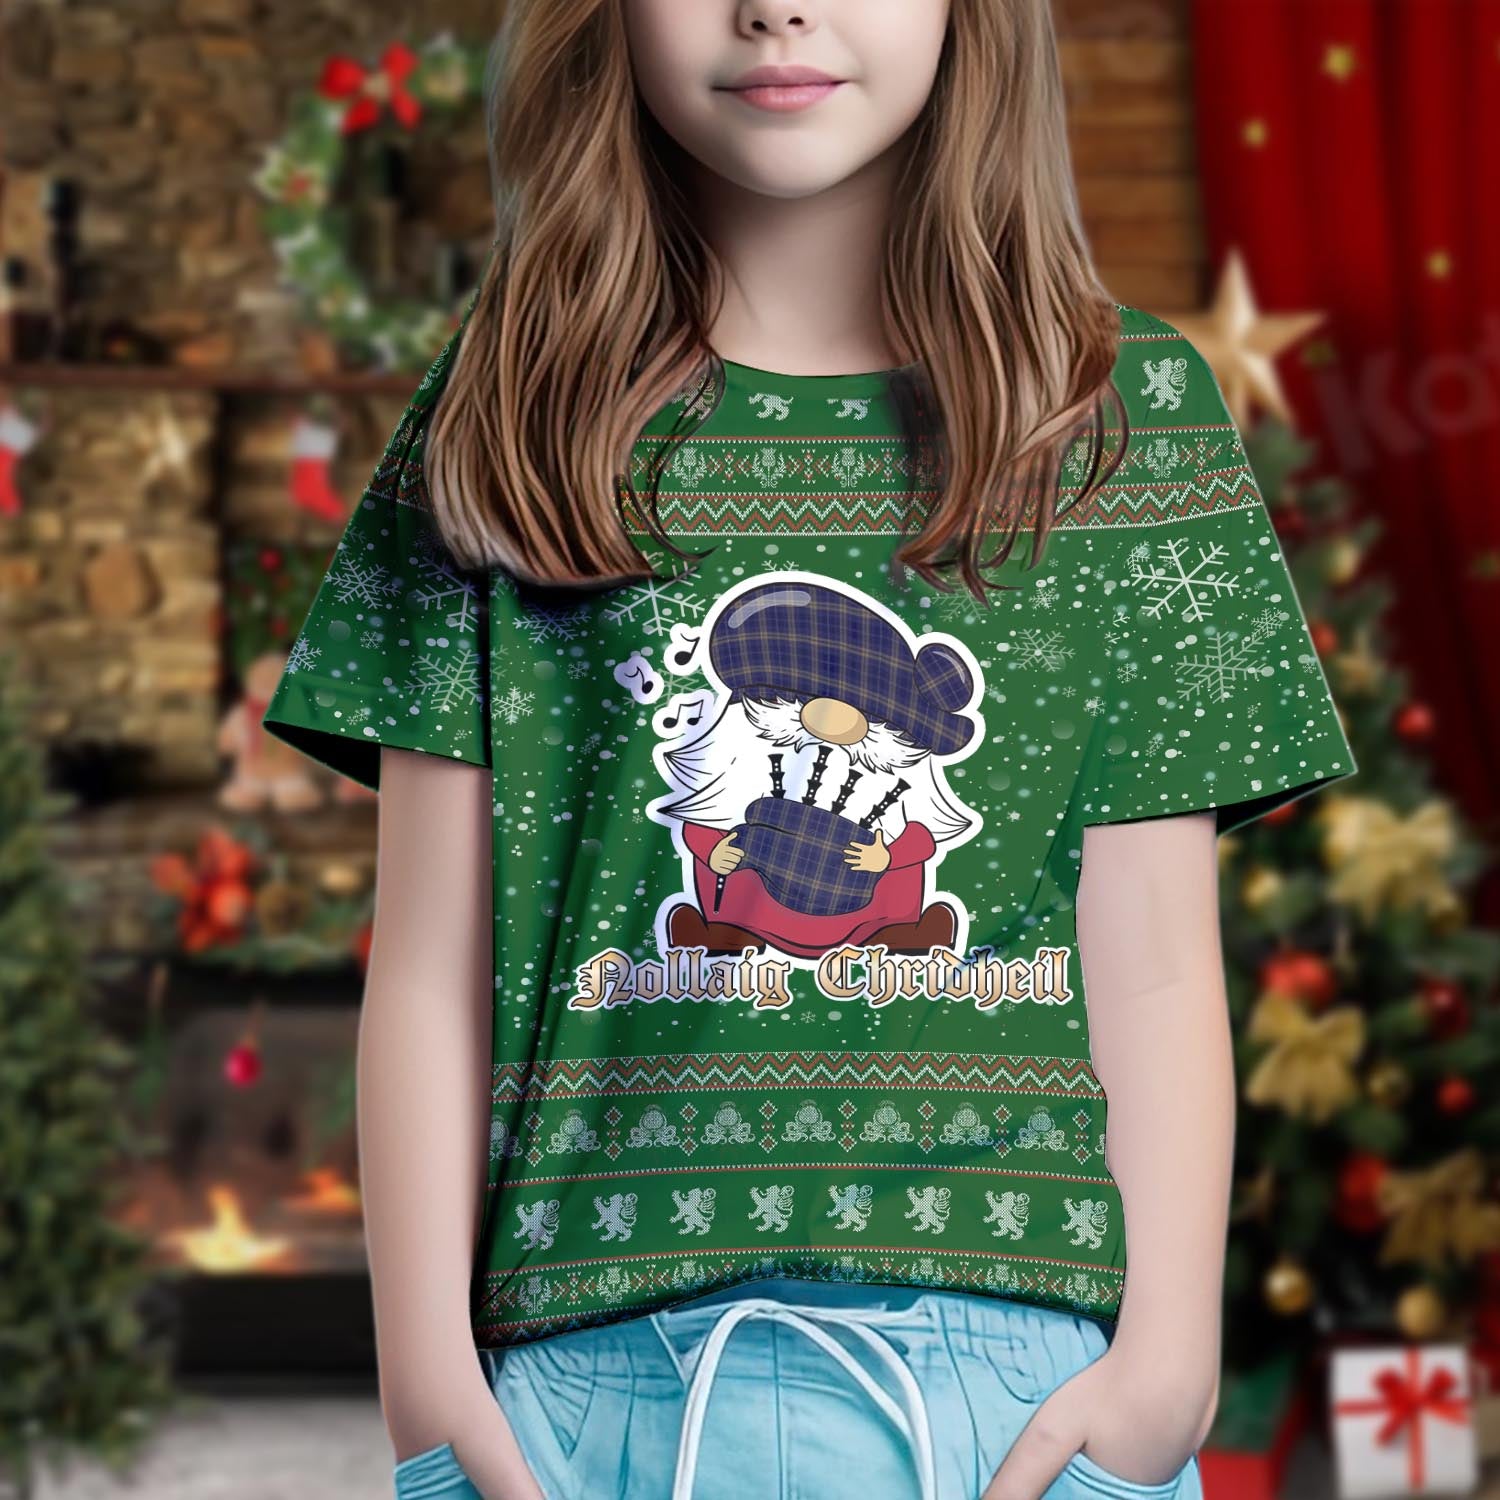 Rhys of Wales Clan Christmas Family T-Shirt with Funny Gnome Playing Bagpipes Kid's Shirt Green - Tartanvibesclothing